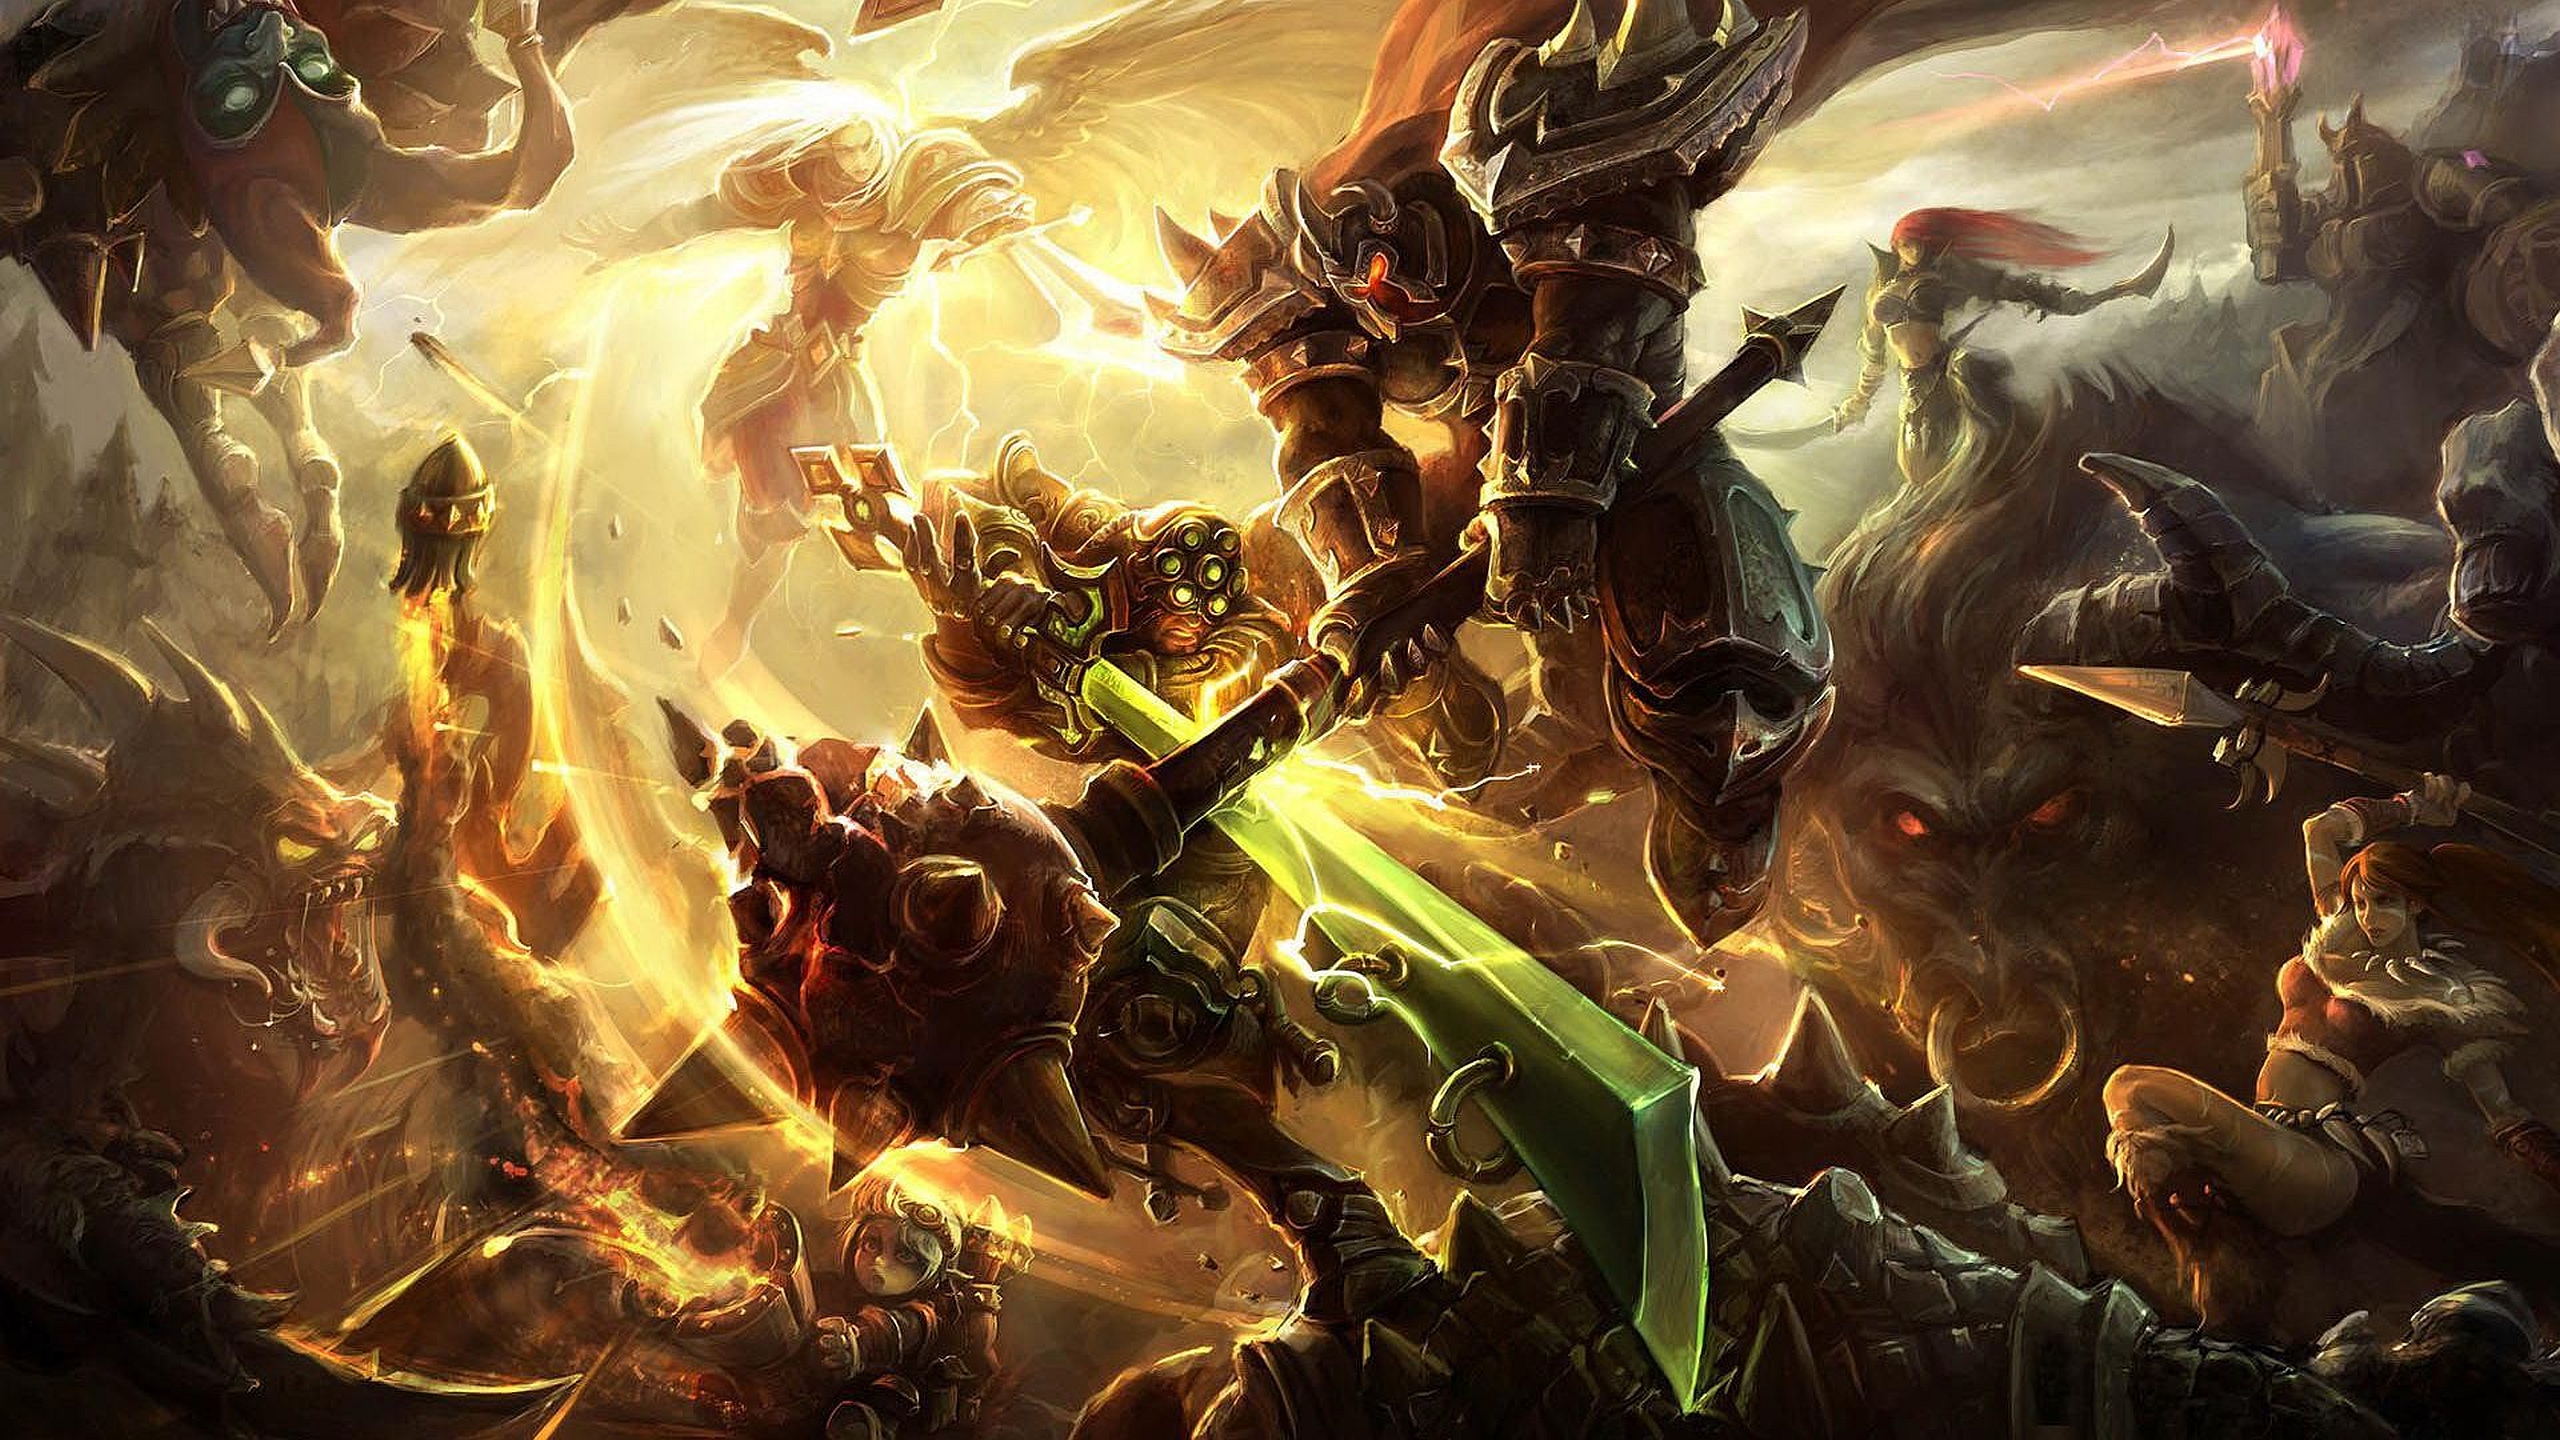 Free HD video game, league of legends, alistar (league of legends), cho'gath (league of legends), katarina (league of legends), kayle (league of legends), leona (league of legends), master yi (league of legends), mordekaiser (league of legends), nidalee (league of legends), shaco (league of legends), tristana (league of legends)